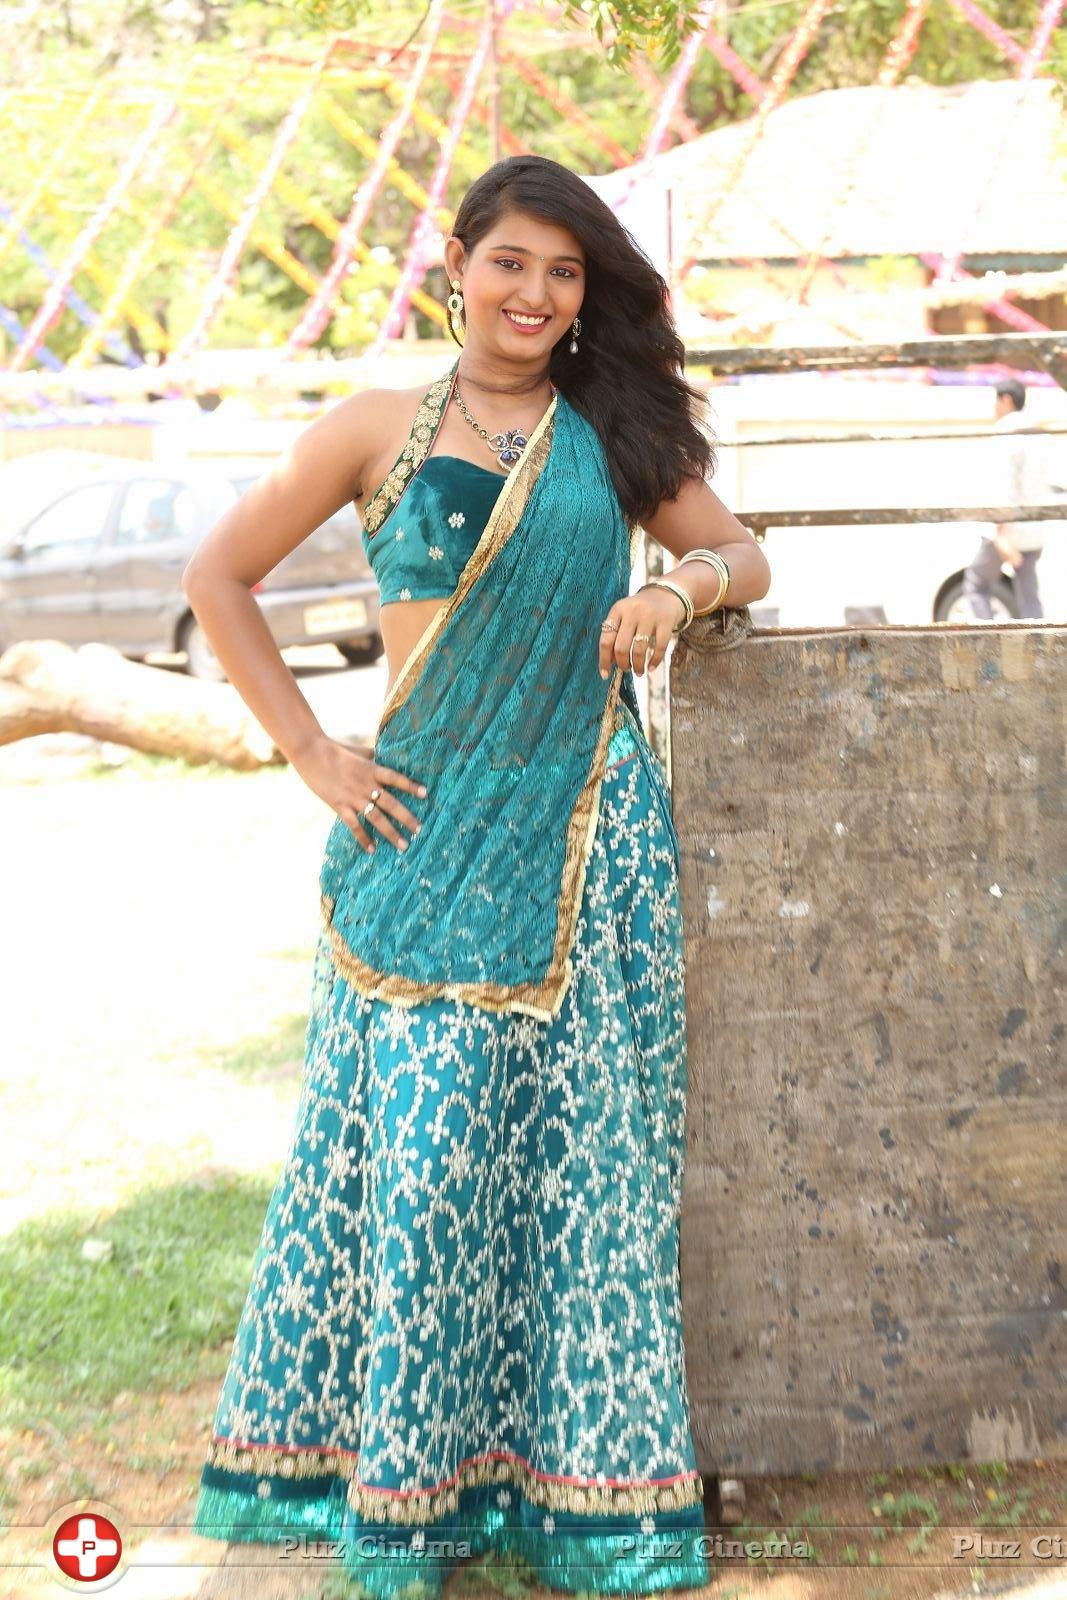 Teja Reddy Latest Gallery | Picture 1324911